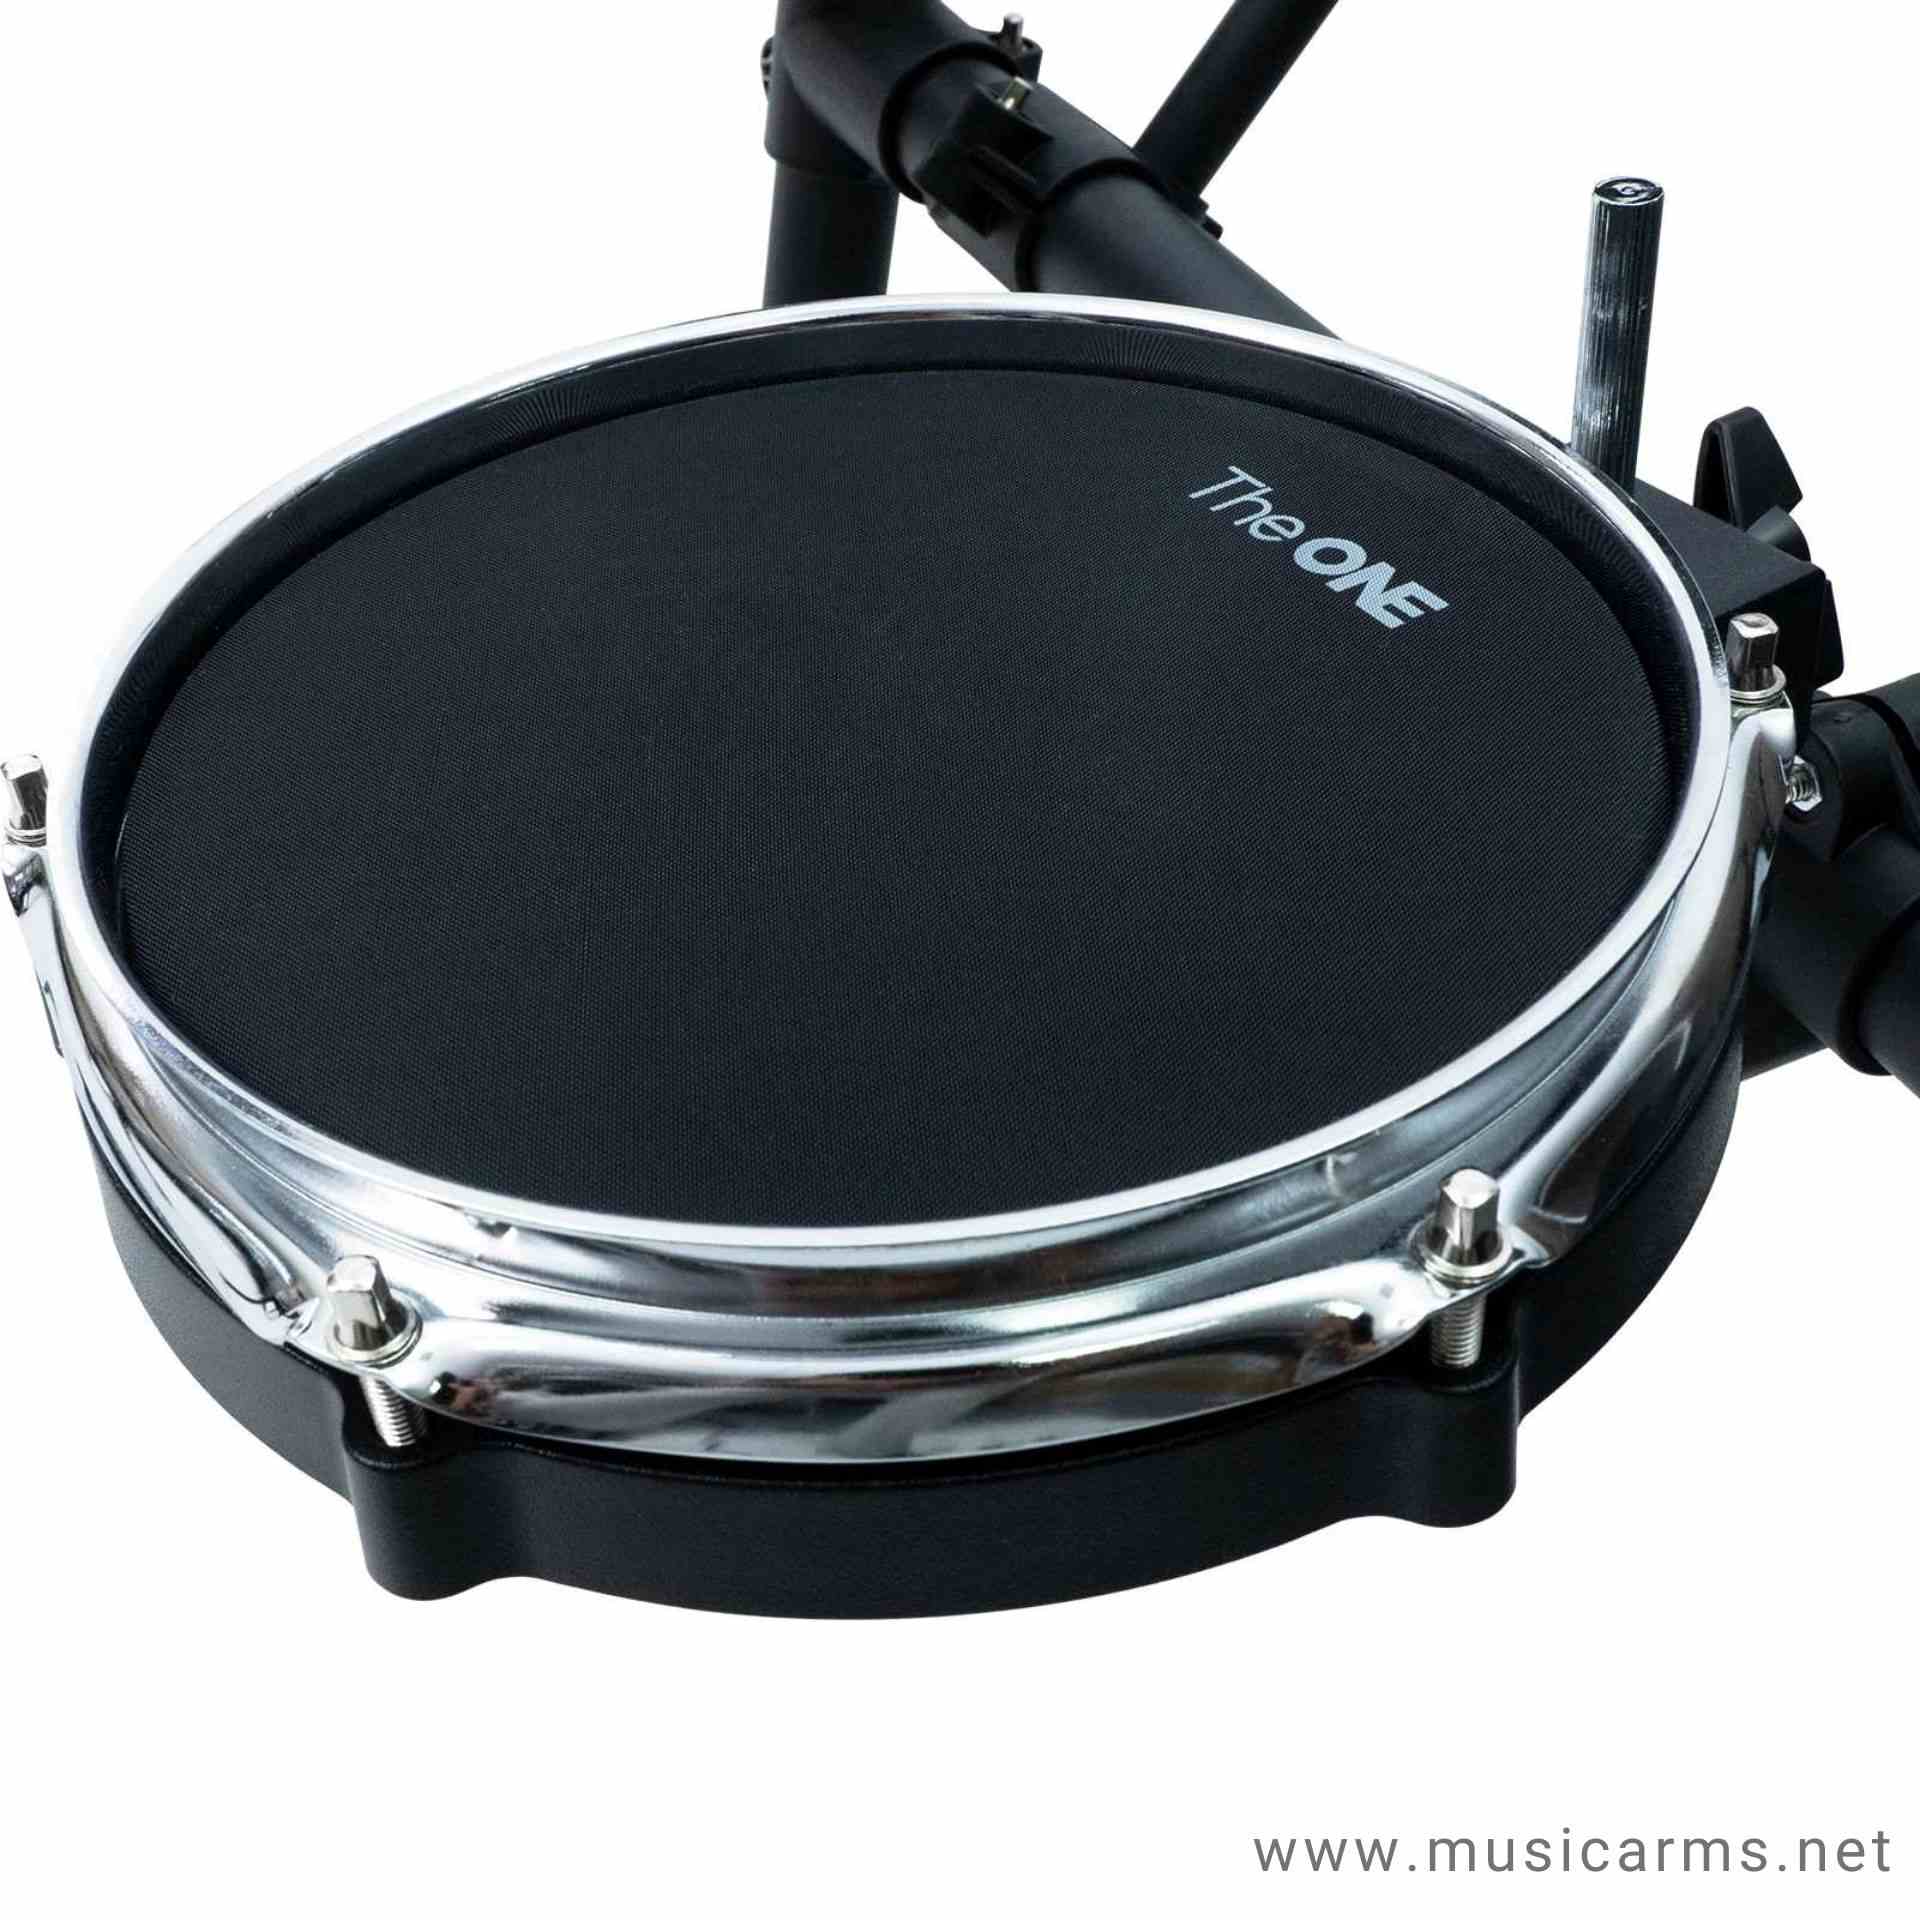 The ONE Electronic Drum EDM-200-06